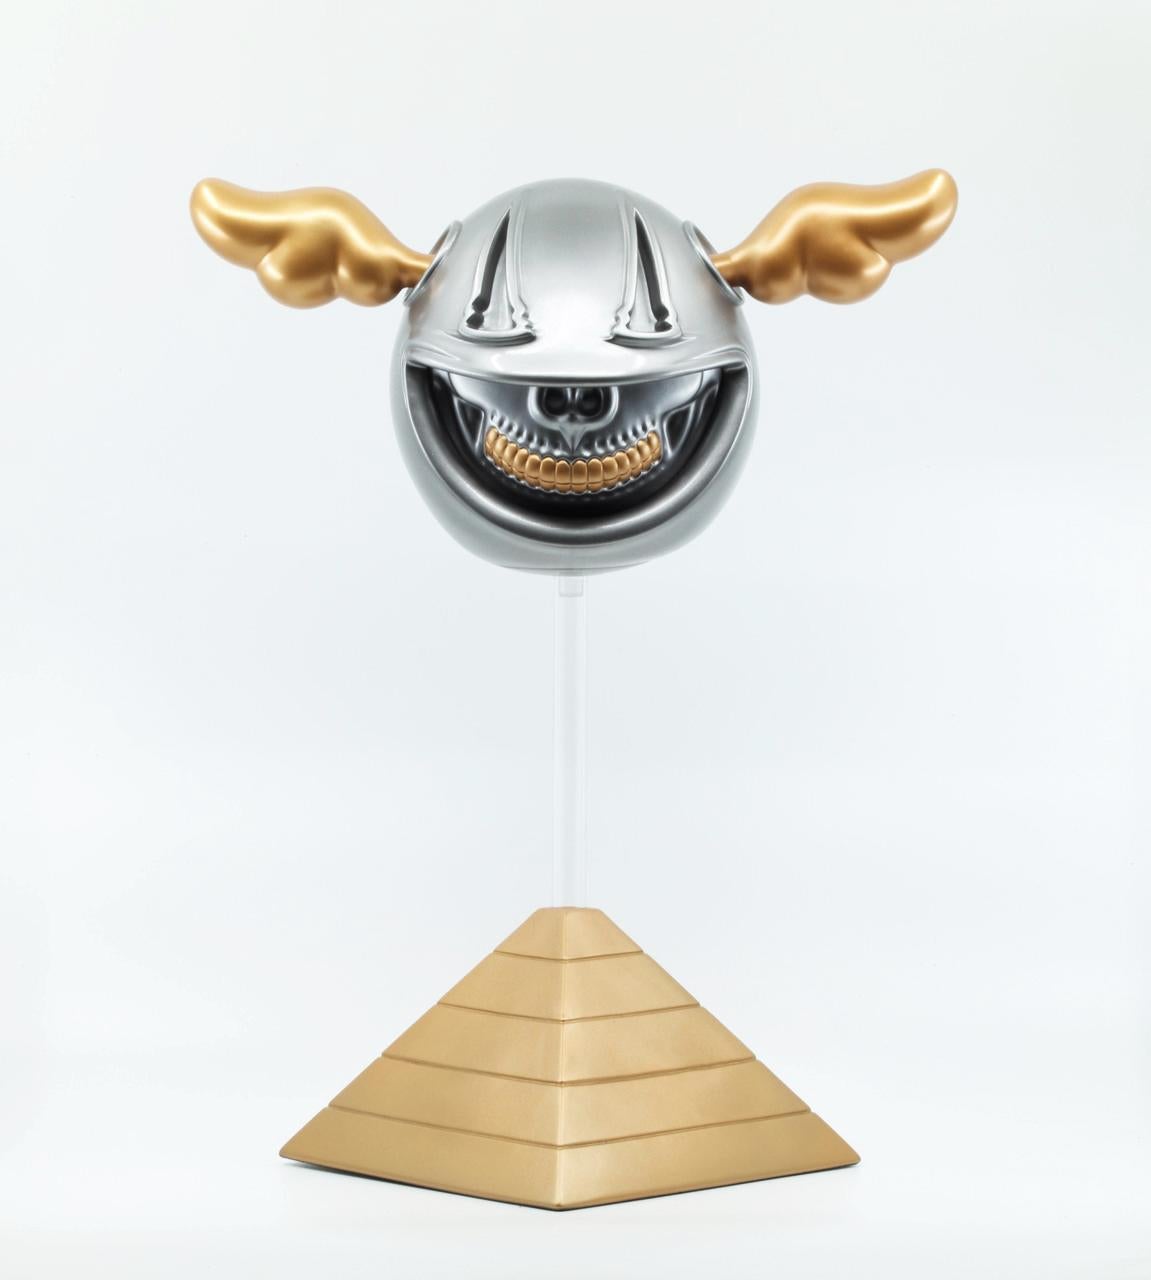 D*DOG GRIN (RON ENGLISH COLLABORATION) - Sculpture by D*Face